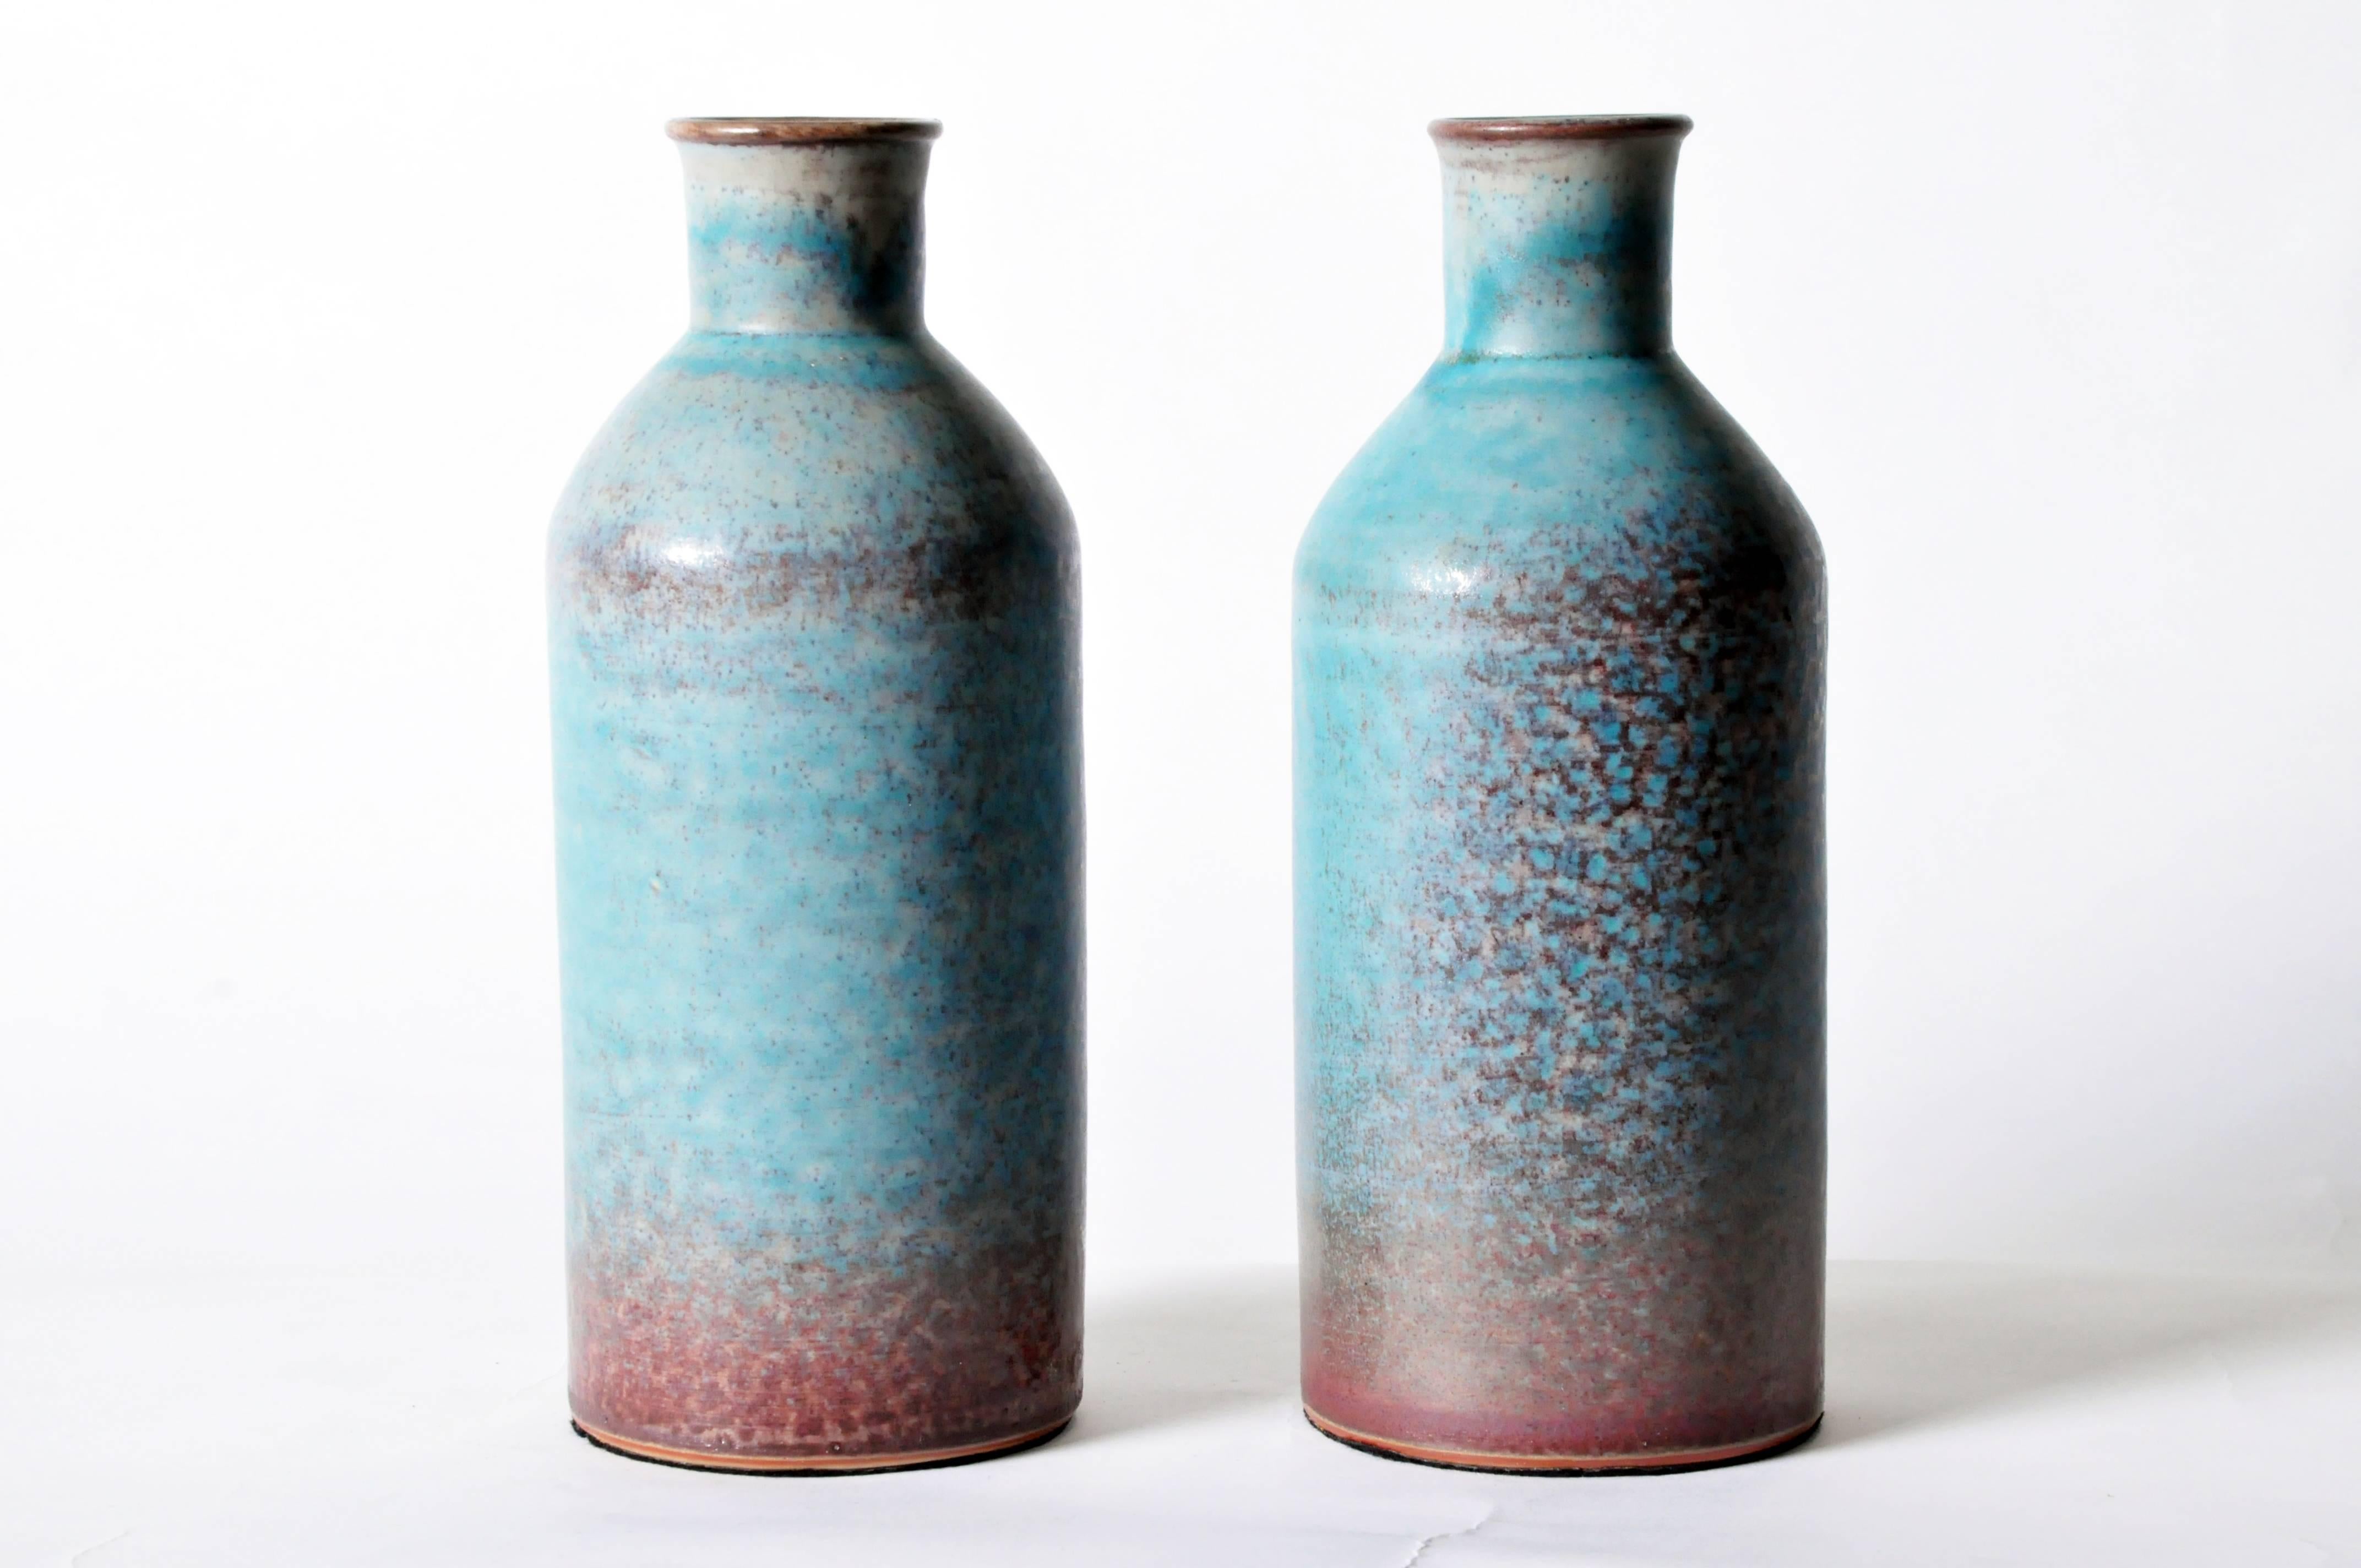 This elegant handmade vessel features a multi-tonal glaze of matte turquoise dappled with purple. Each is sold individually; glaze patterns and coloring vary from vase to vase.